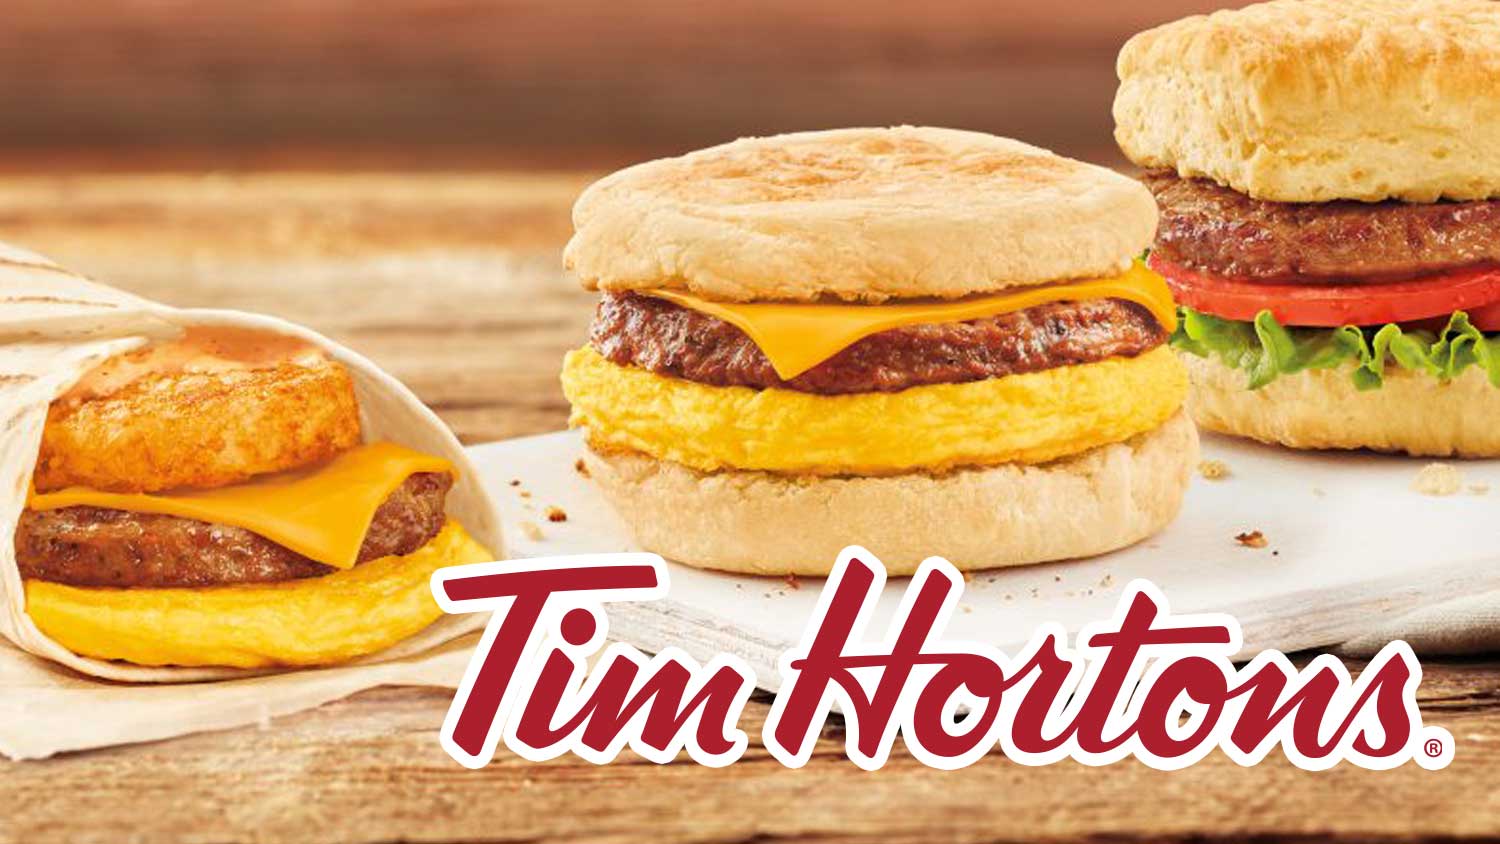 Tim Hortons is adding Beyond Meat sausages to its menu